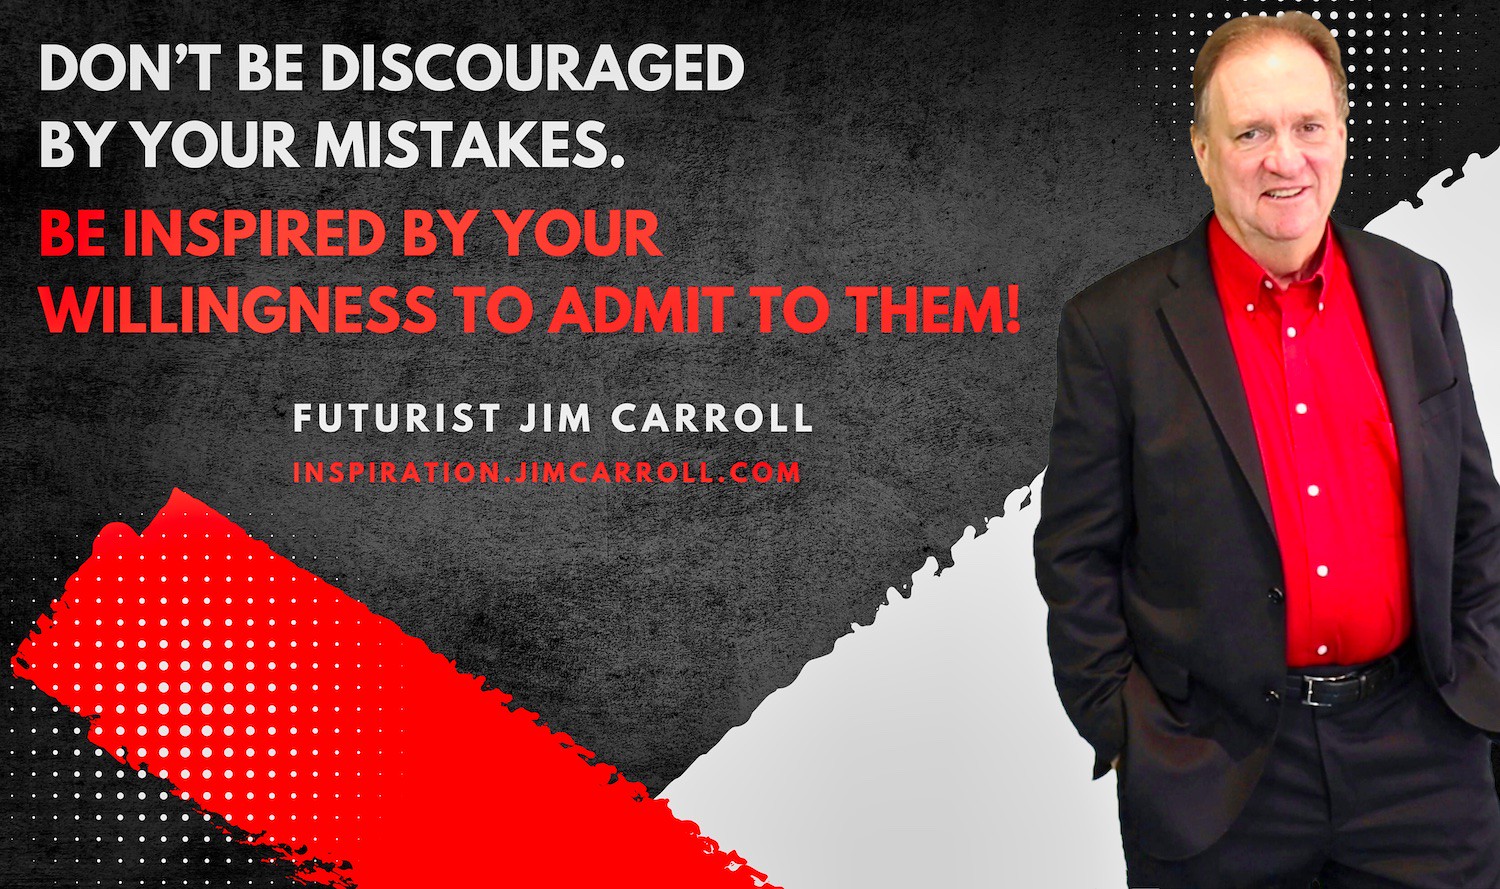 "Don't be discouraged by your mistakes. Be inspired by your willingness to admit to them!" - Futurist Jim Carroll